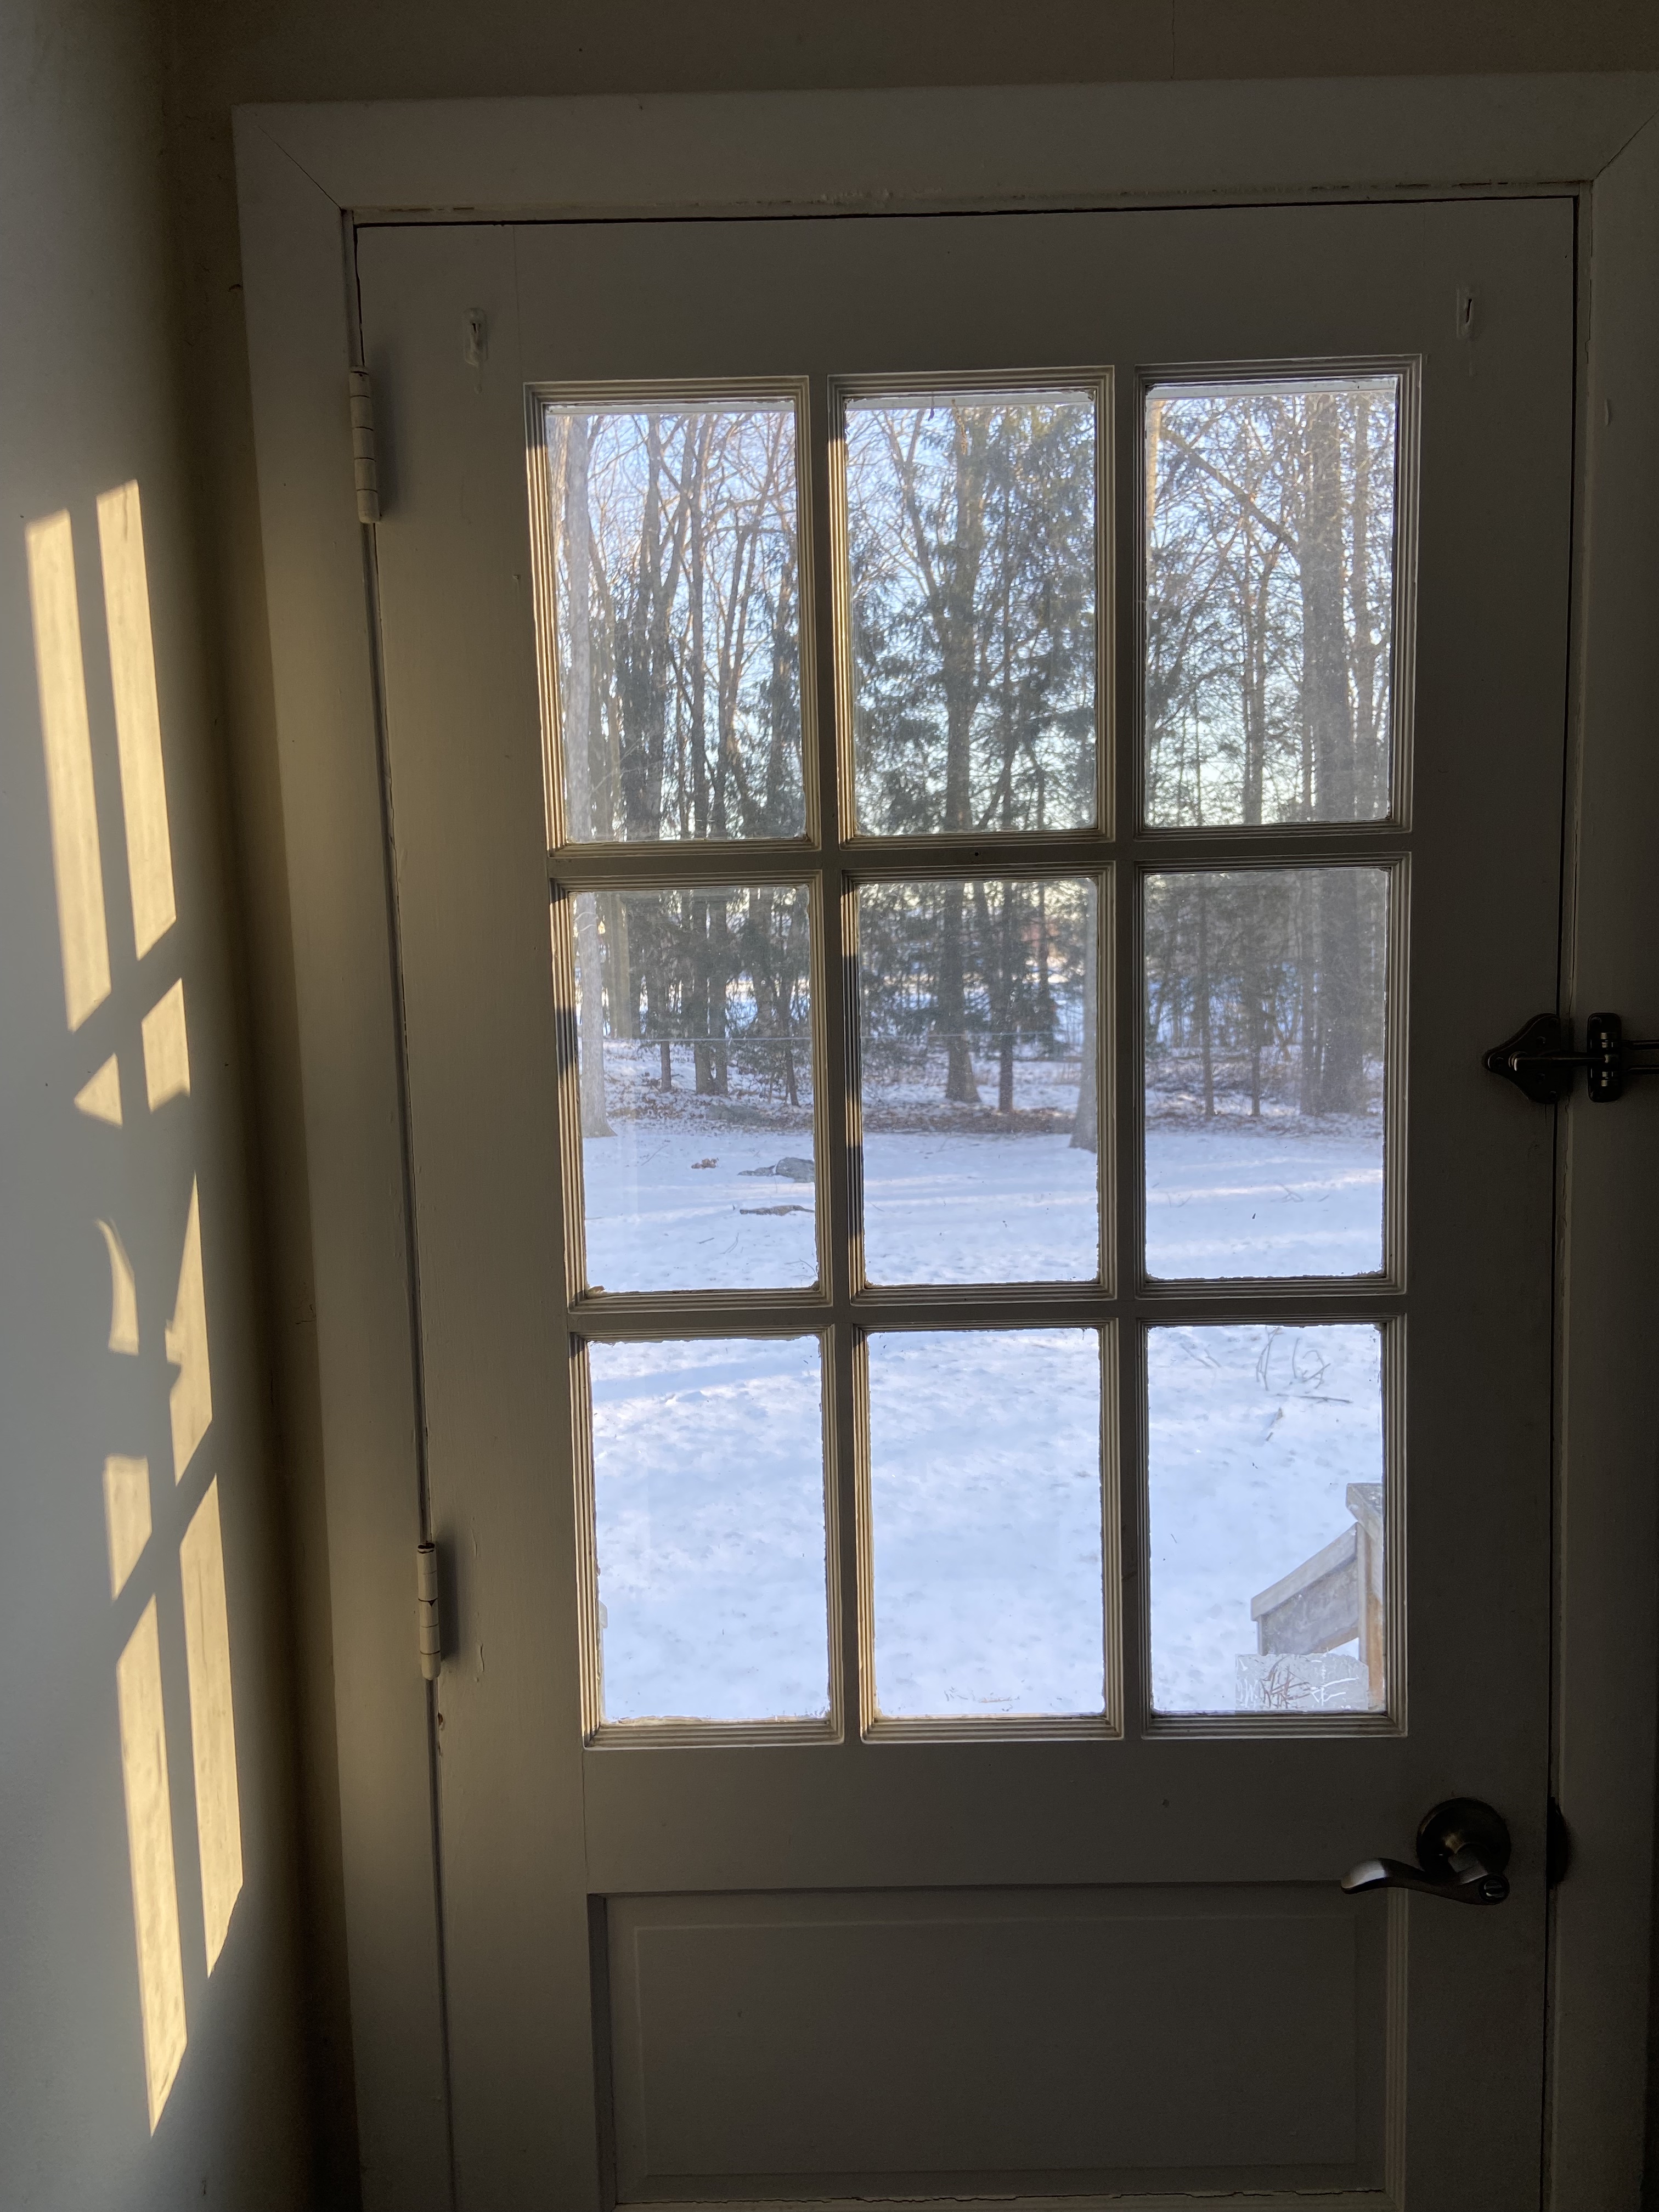 This is an image of the backyard of a house as seen through the back door window. The view through the window is of a snowy landscape with trees in the background.